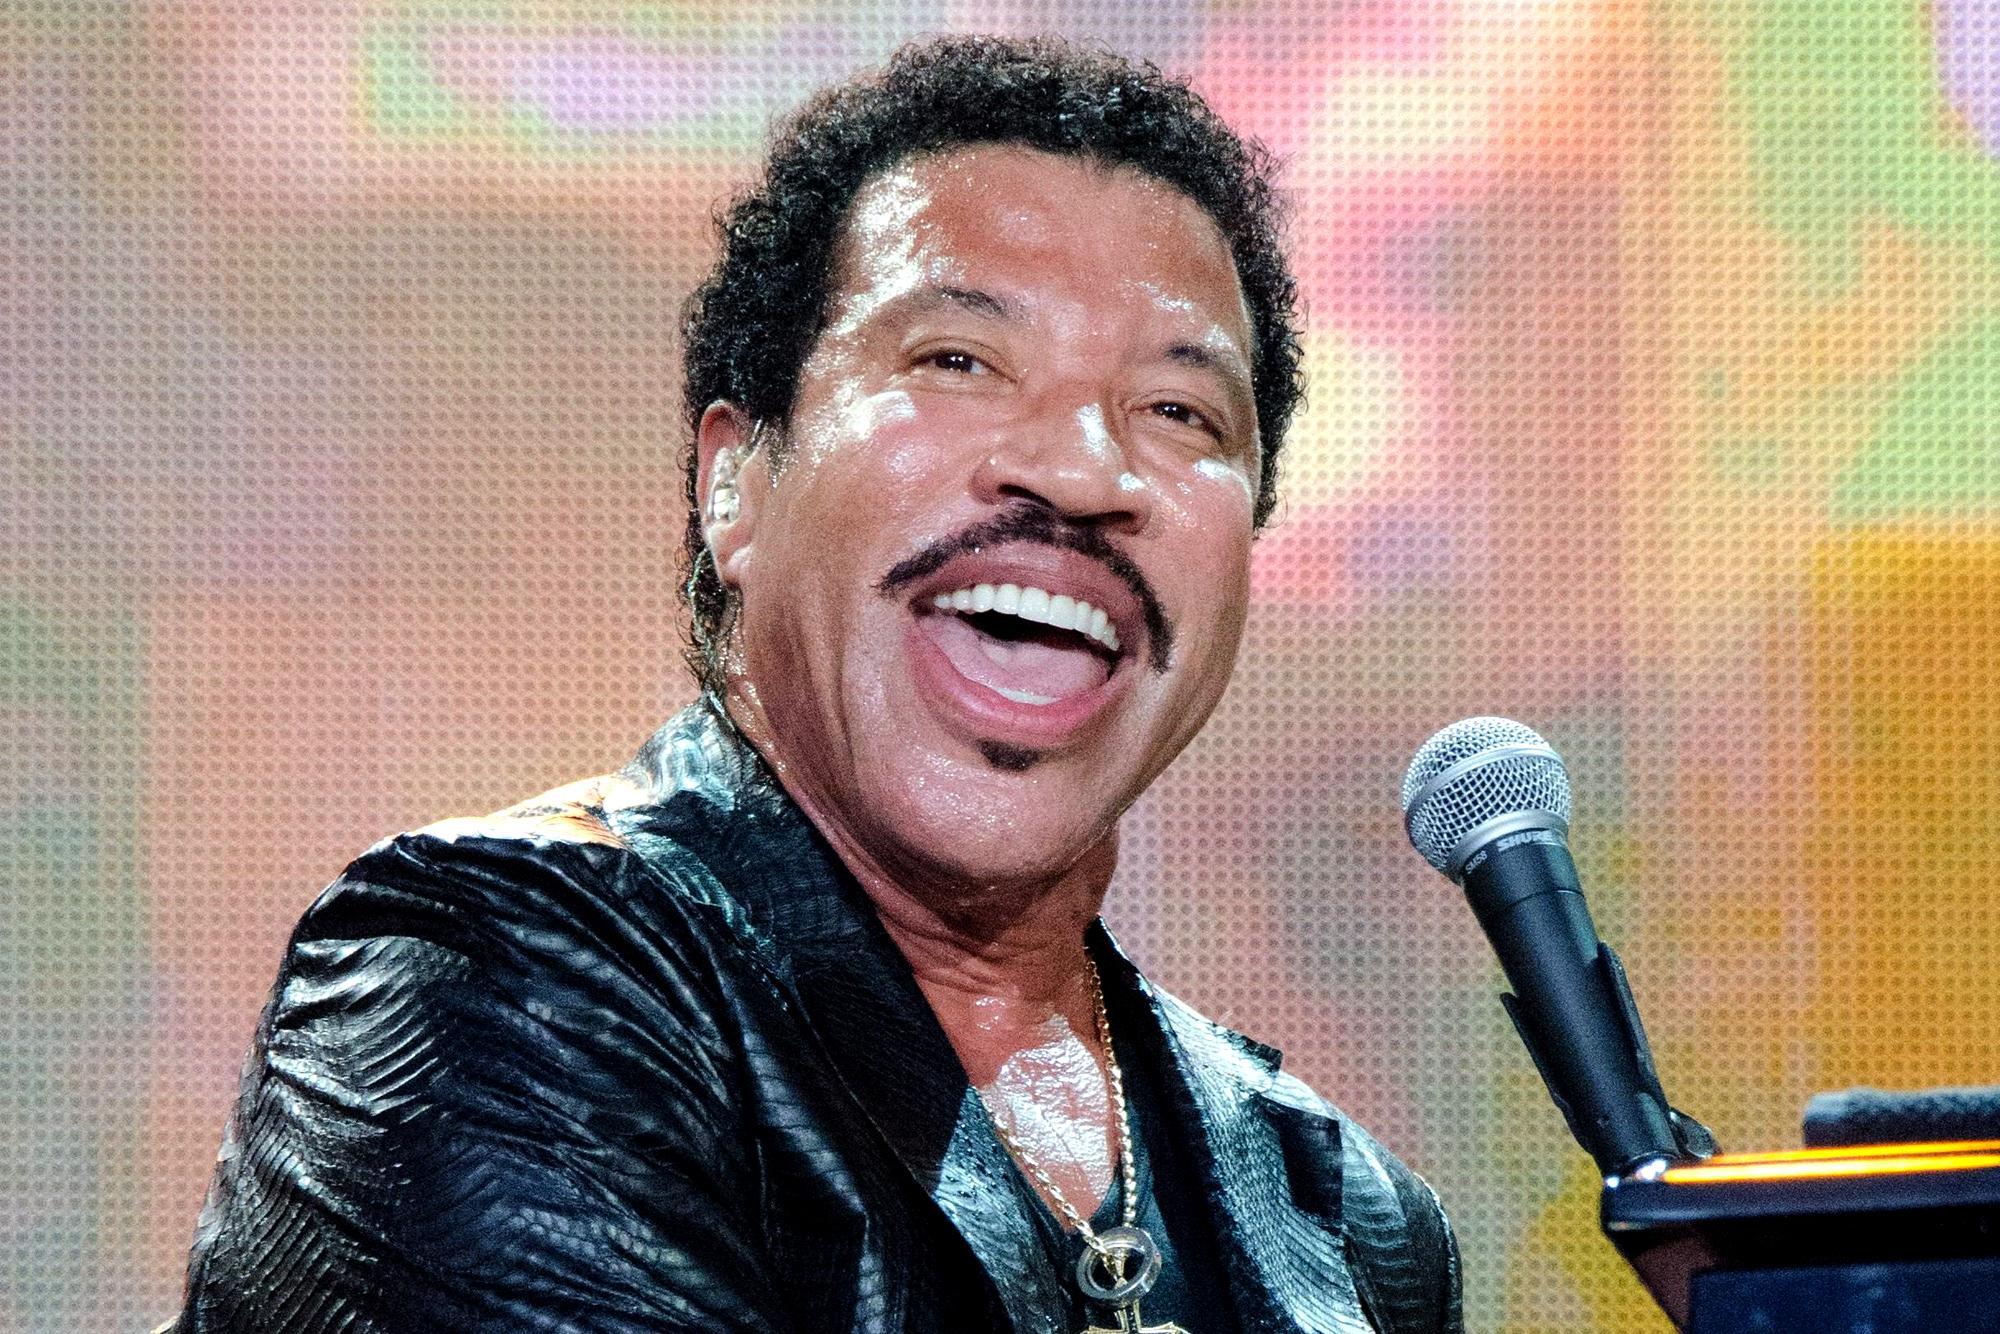 Lionel Richie Wallpapers Image Photos Pictures Backgrounds.